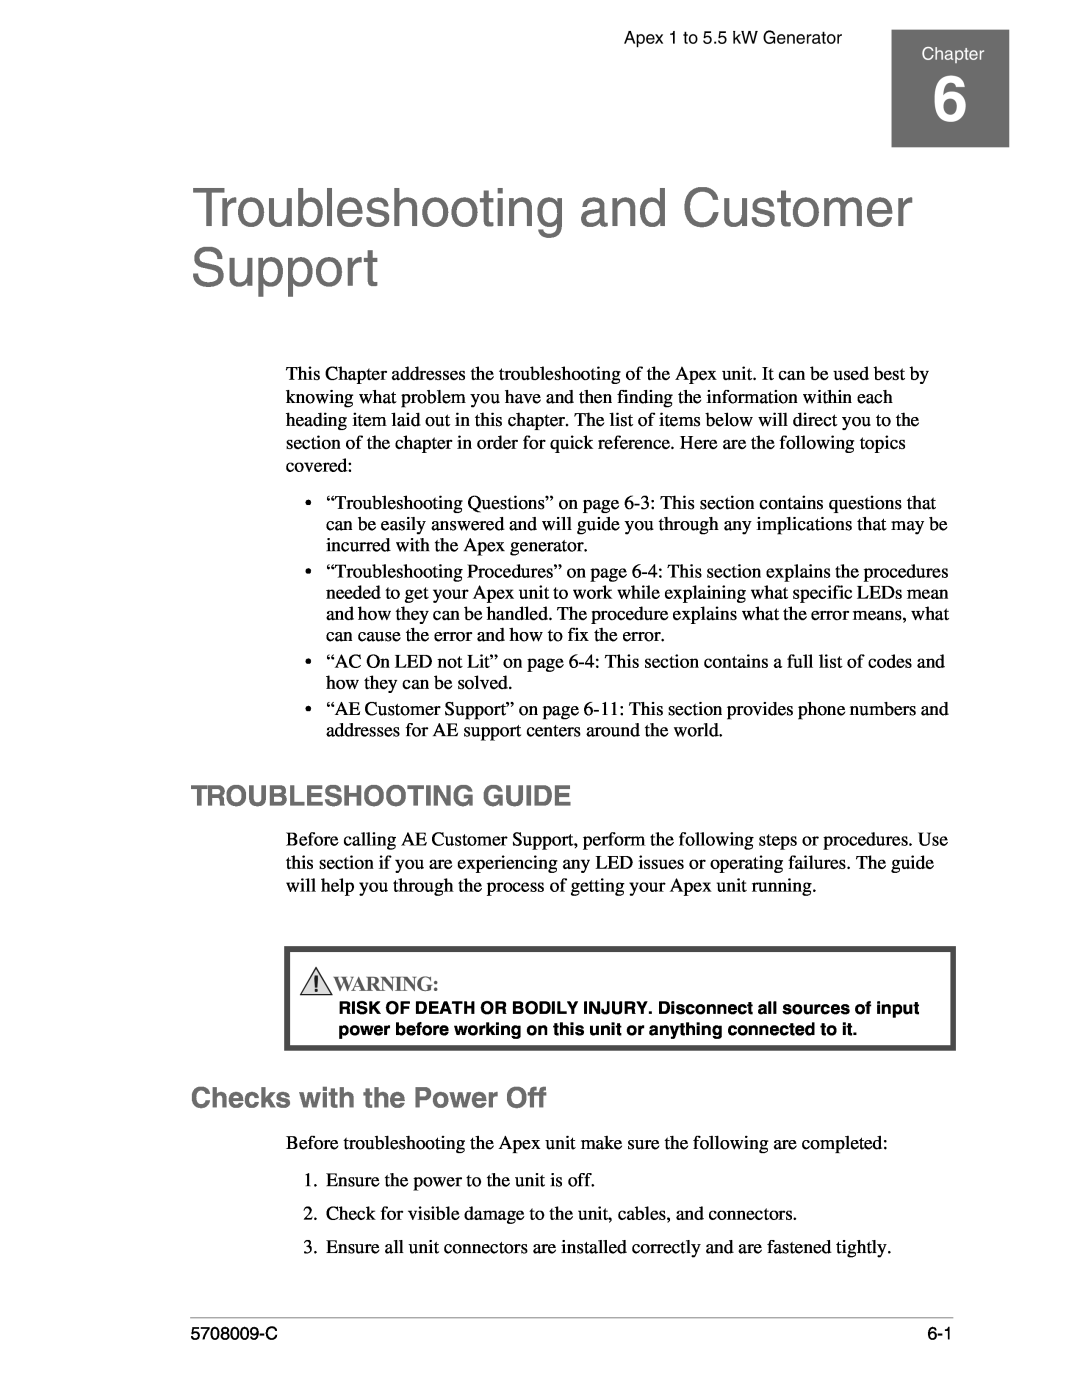 Apex Digital 5708009-C manual Troubleshooting and Customer Support, Troubleshooting Guide, Checks with the Power Off 